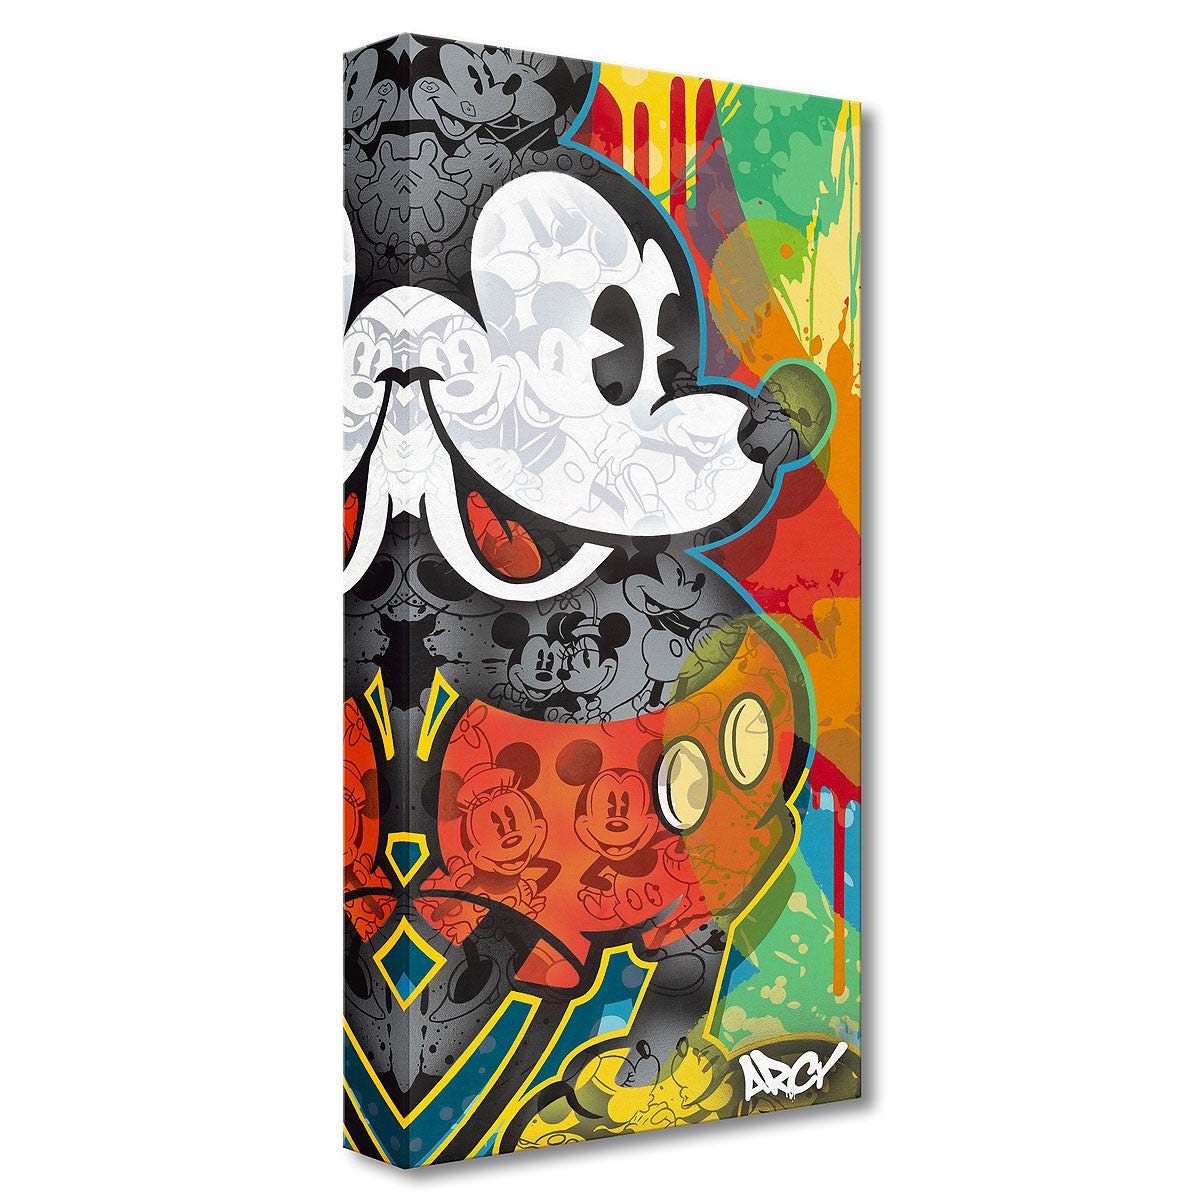 Arcy Disney "I'll Be Your Mickey" Limited Edition Canvas Giclee